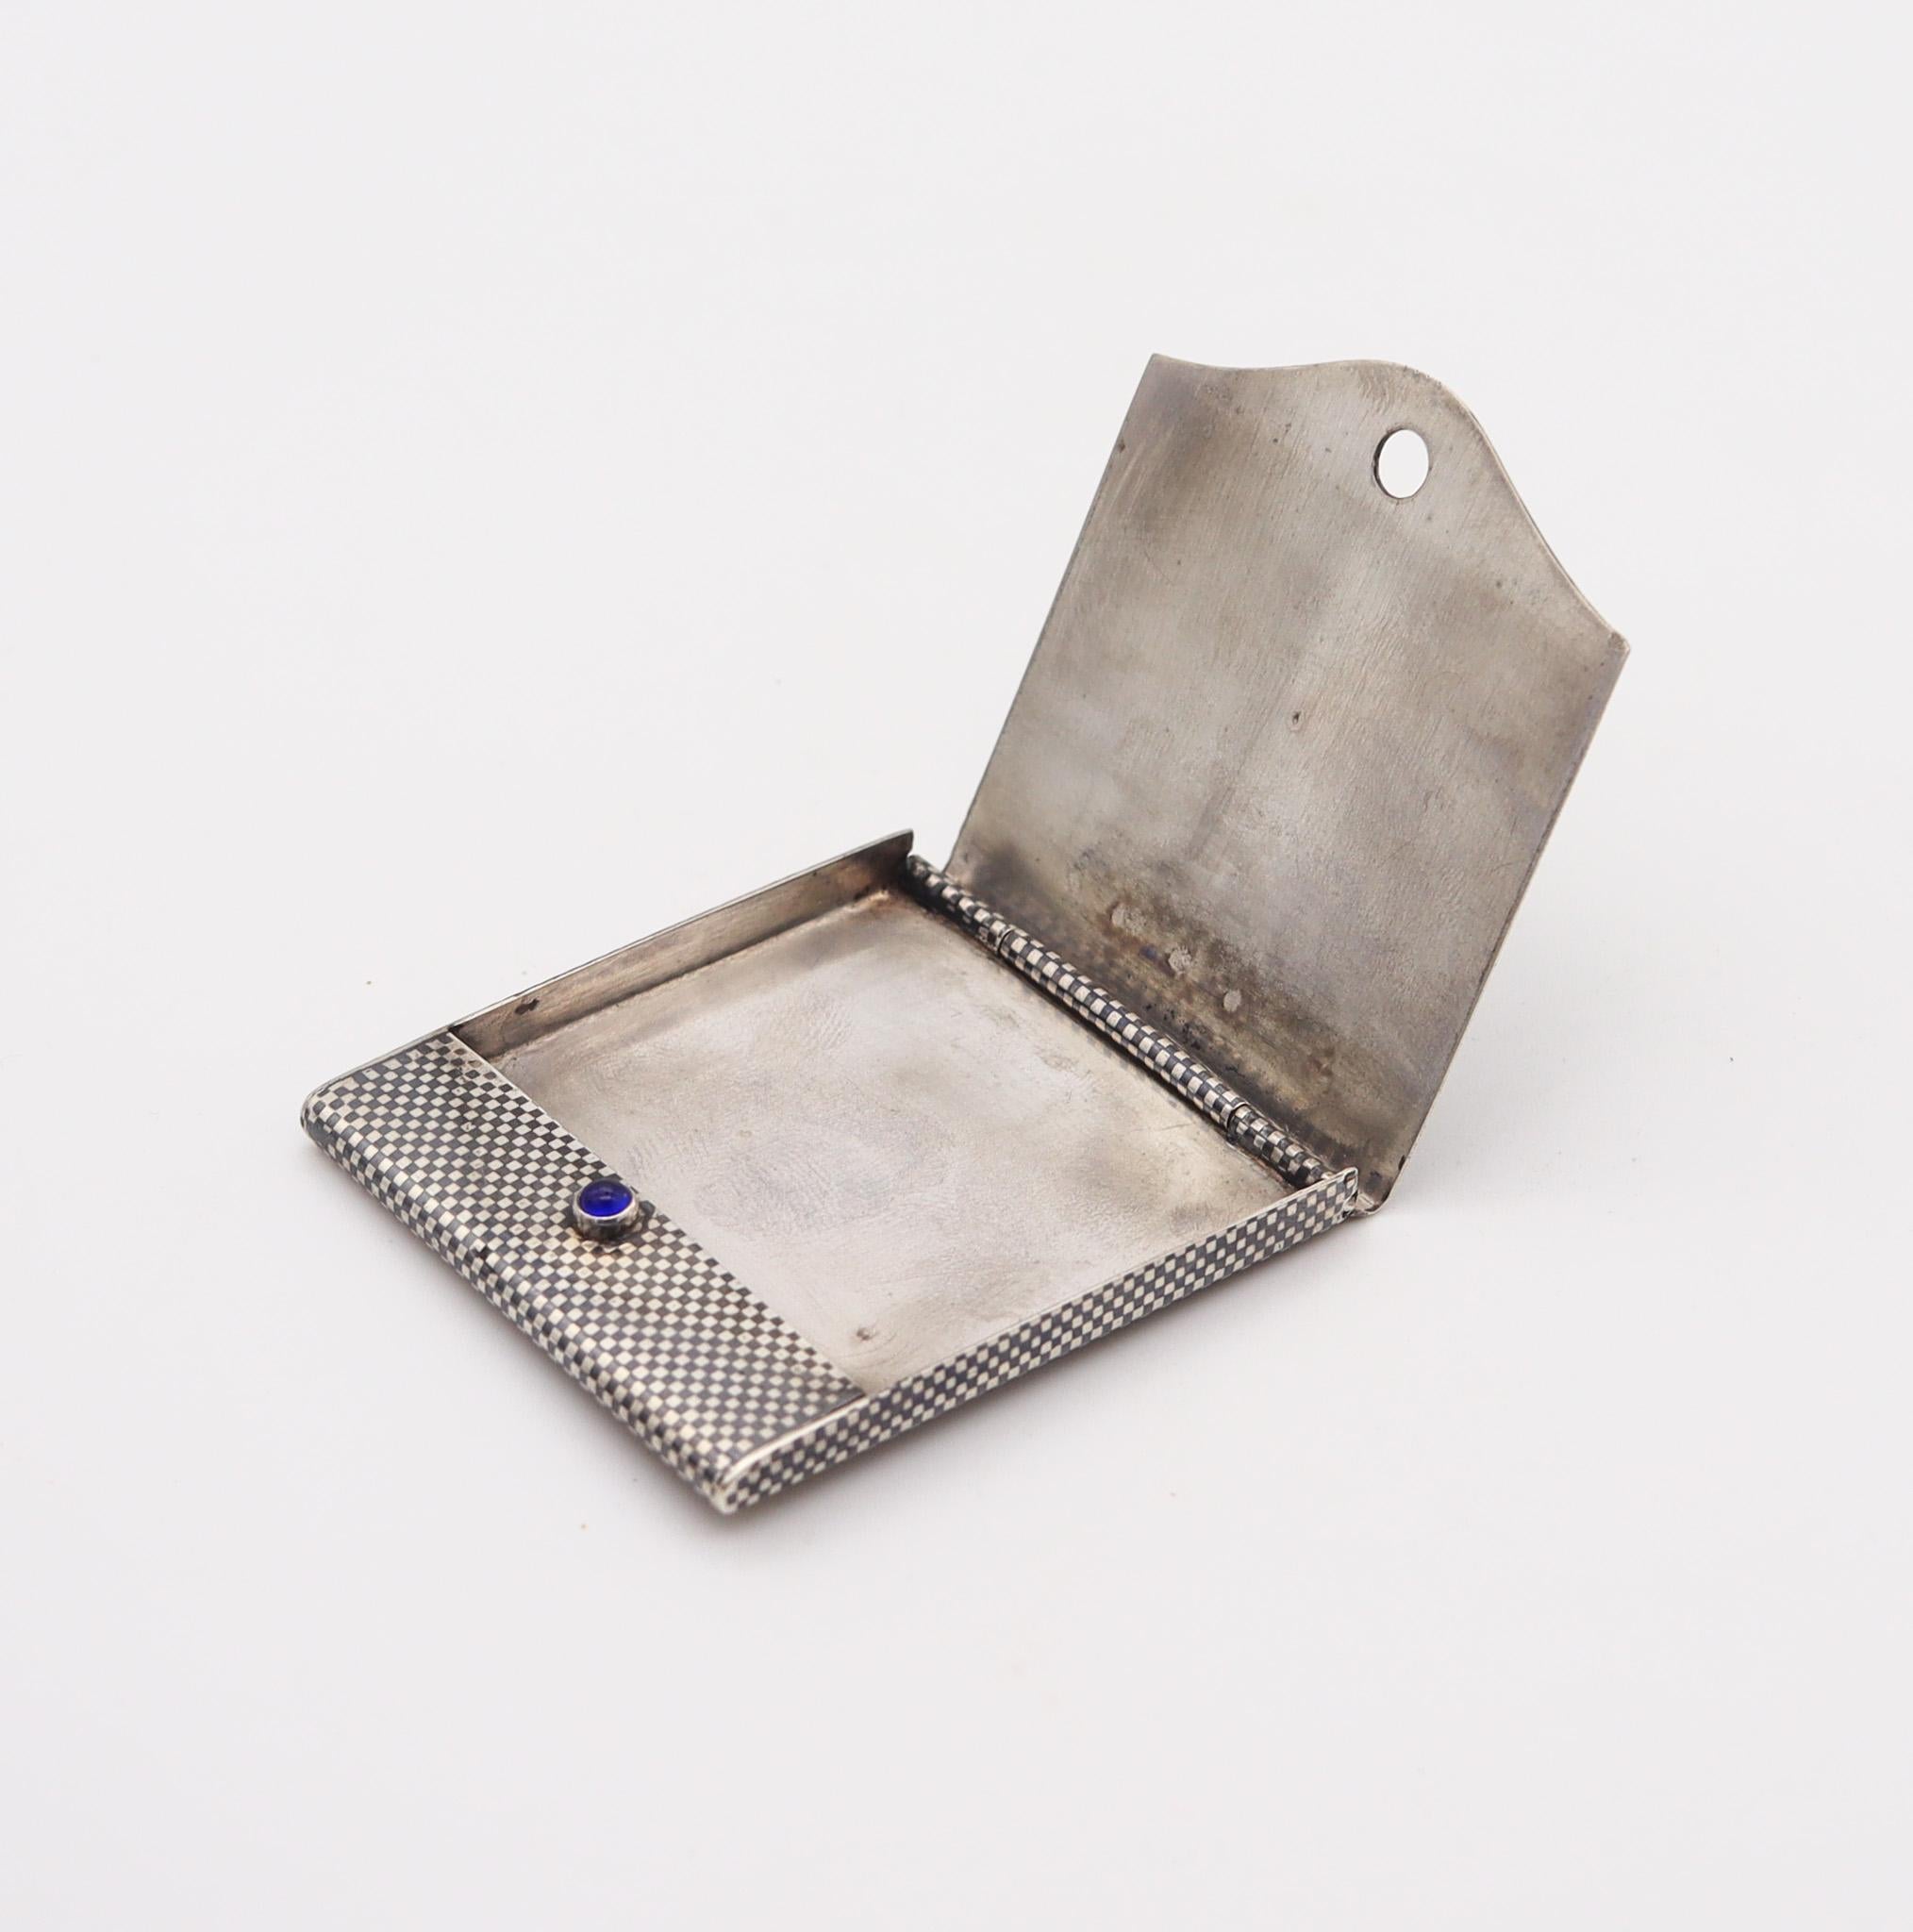 Hand-Crafted Edwardian 1900 Vesta Cards Case In .925 Sterling Silver With Checkerboard Niello